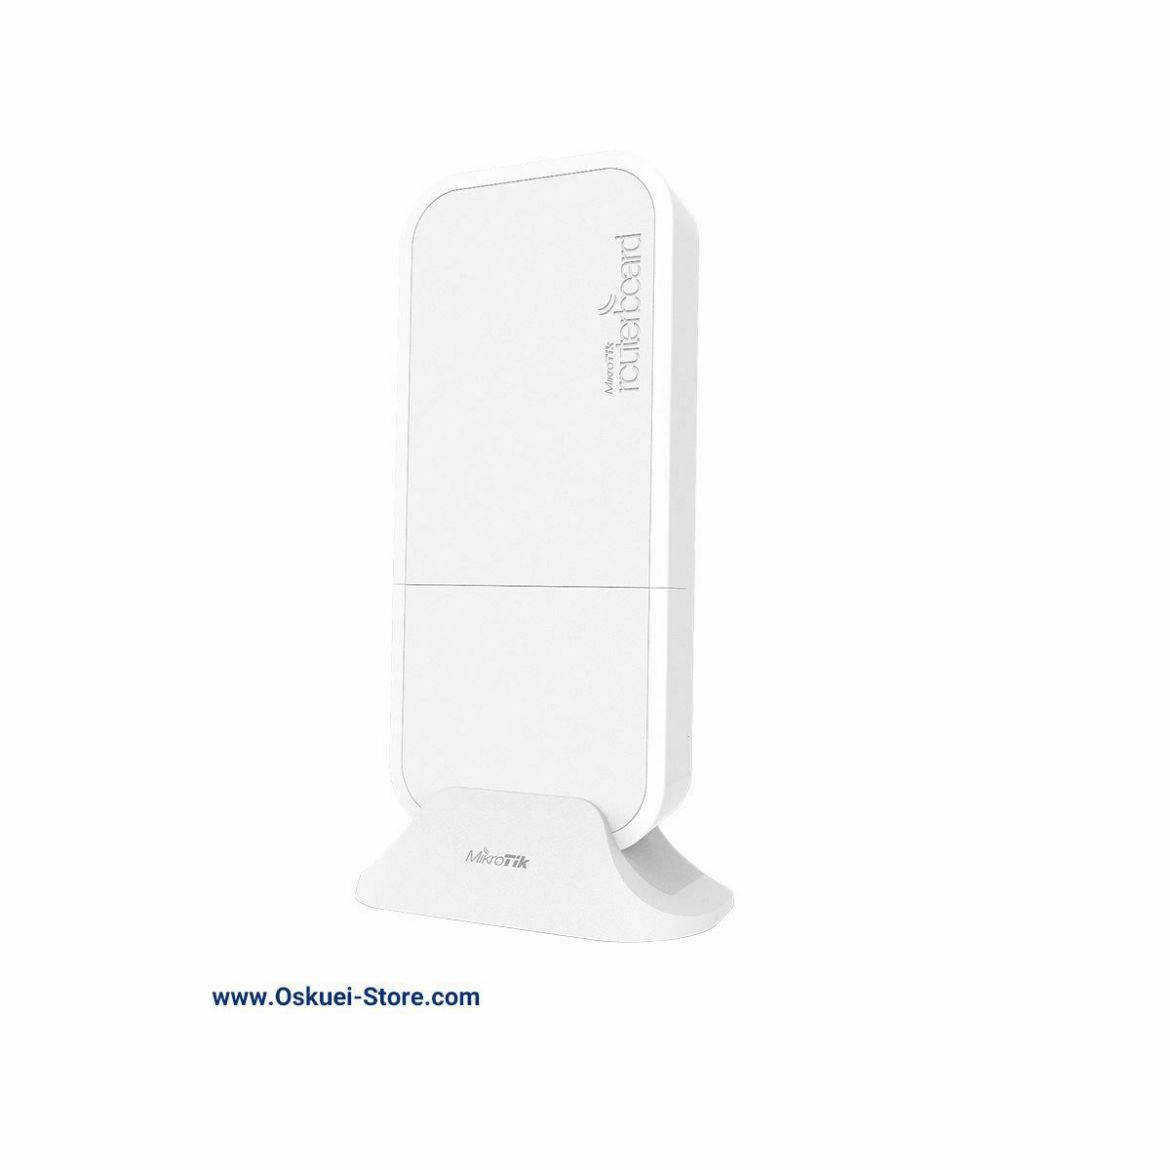 MikroTik RBwAPGR-5HacD2HnD Wireless Access Point Front